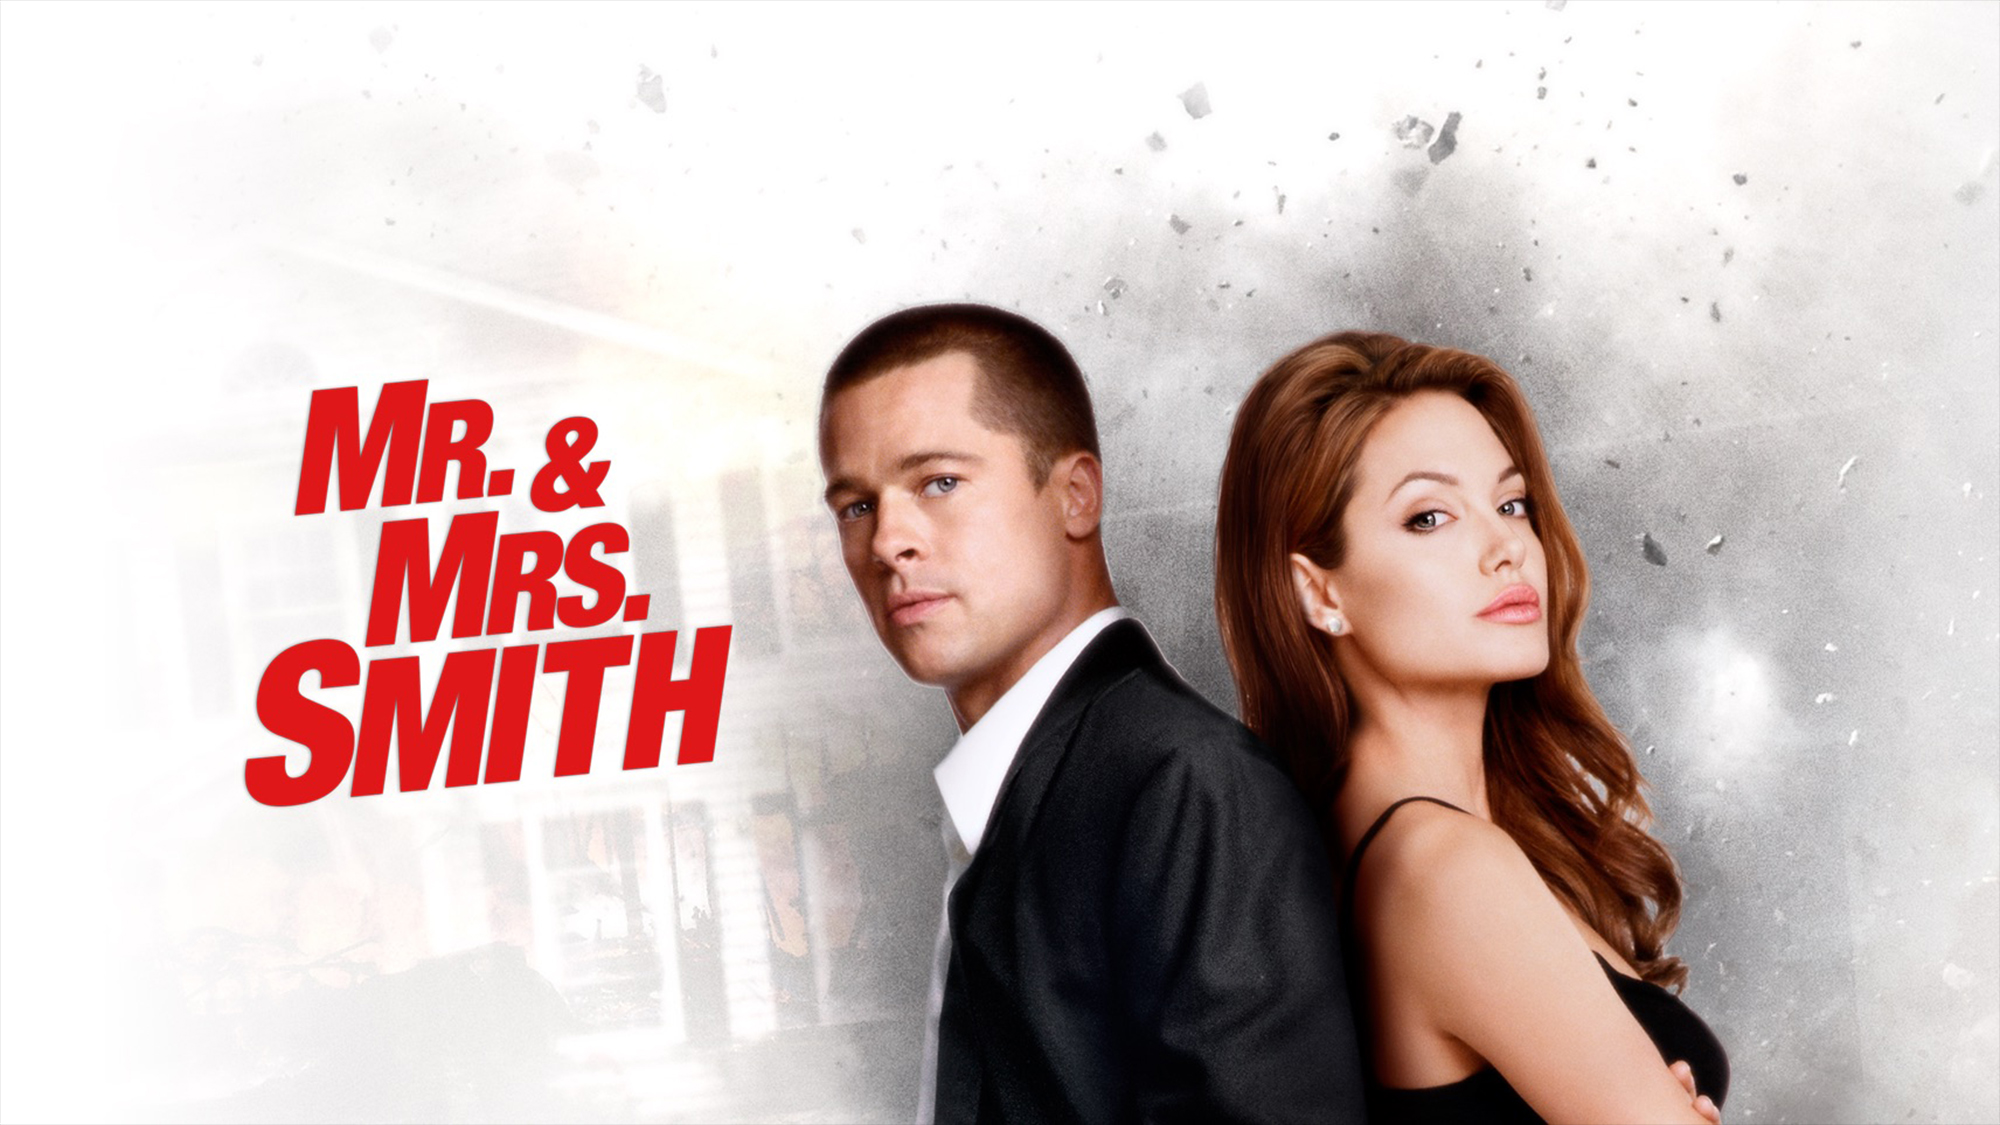 Mr. & Mrs. Smith HD Wallpapers and Backgrounds. 